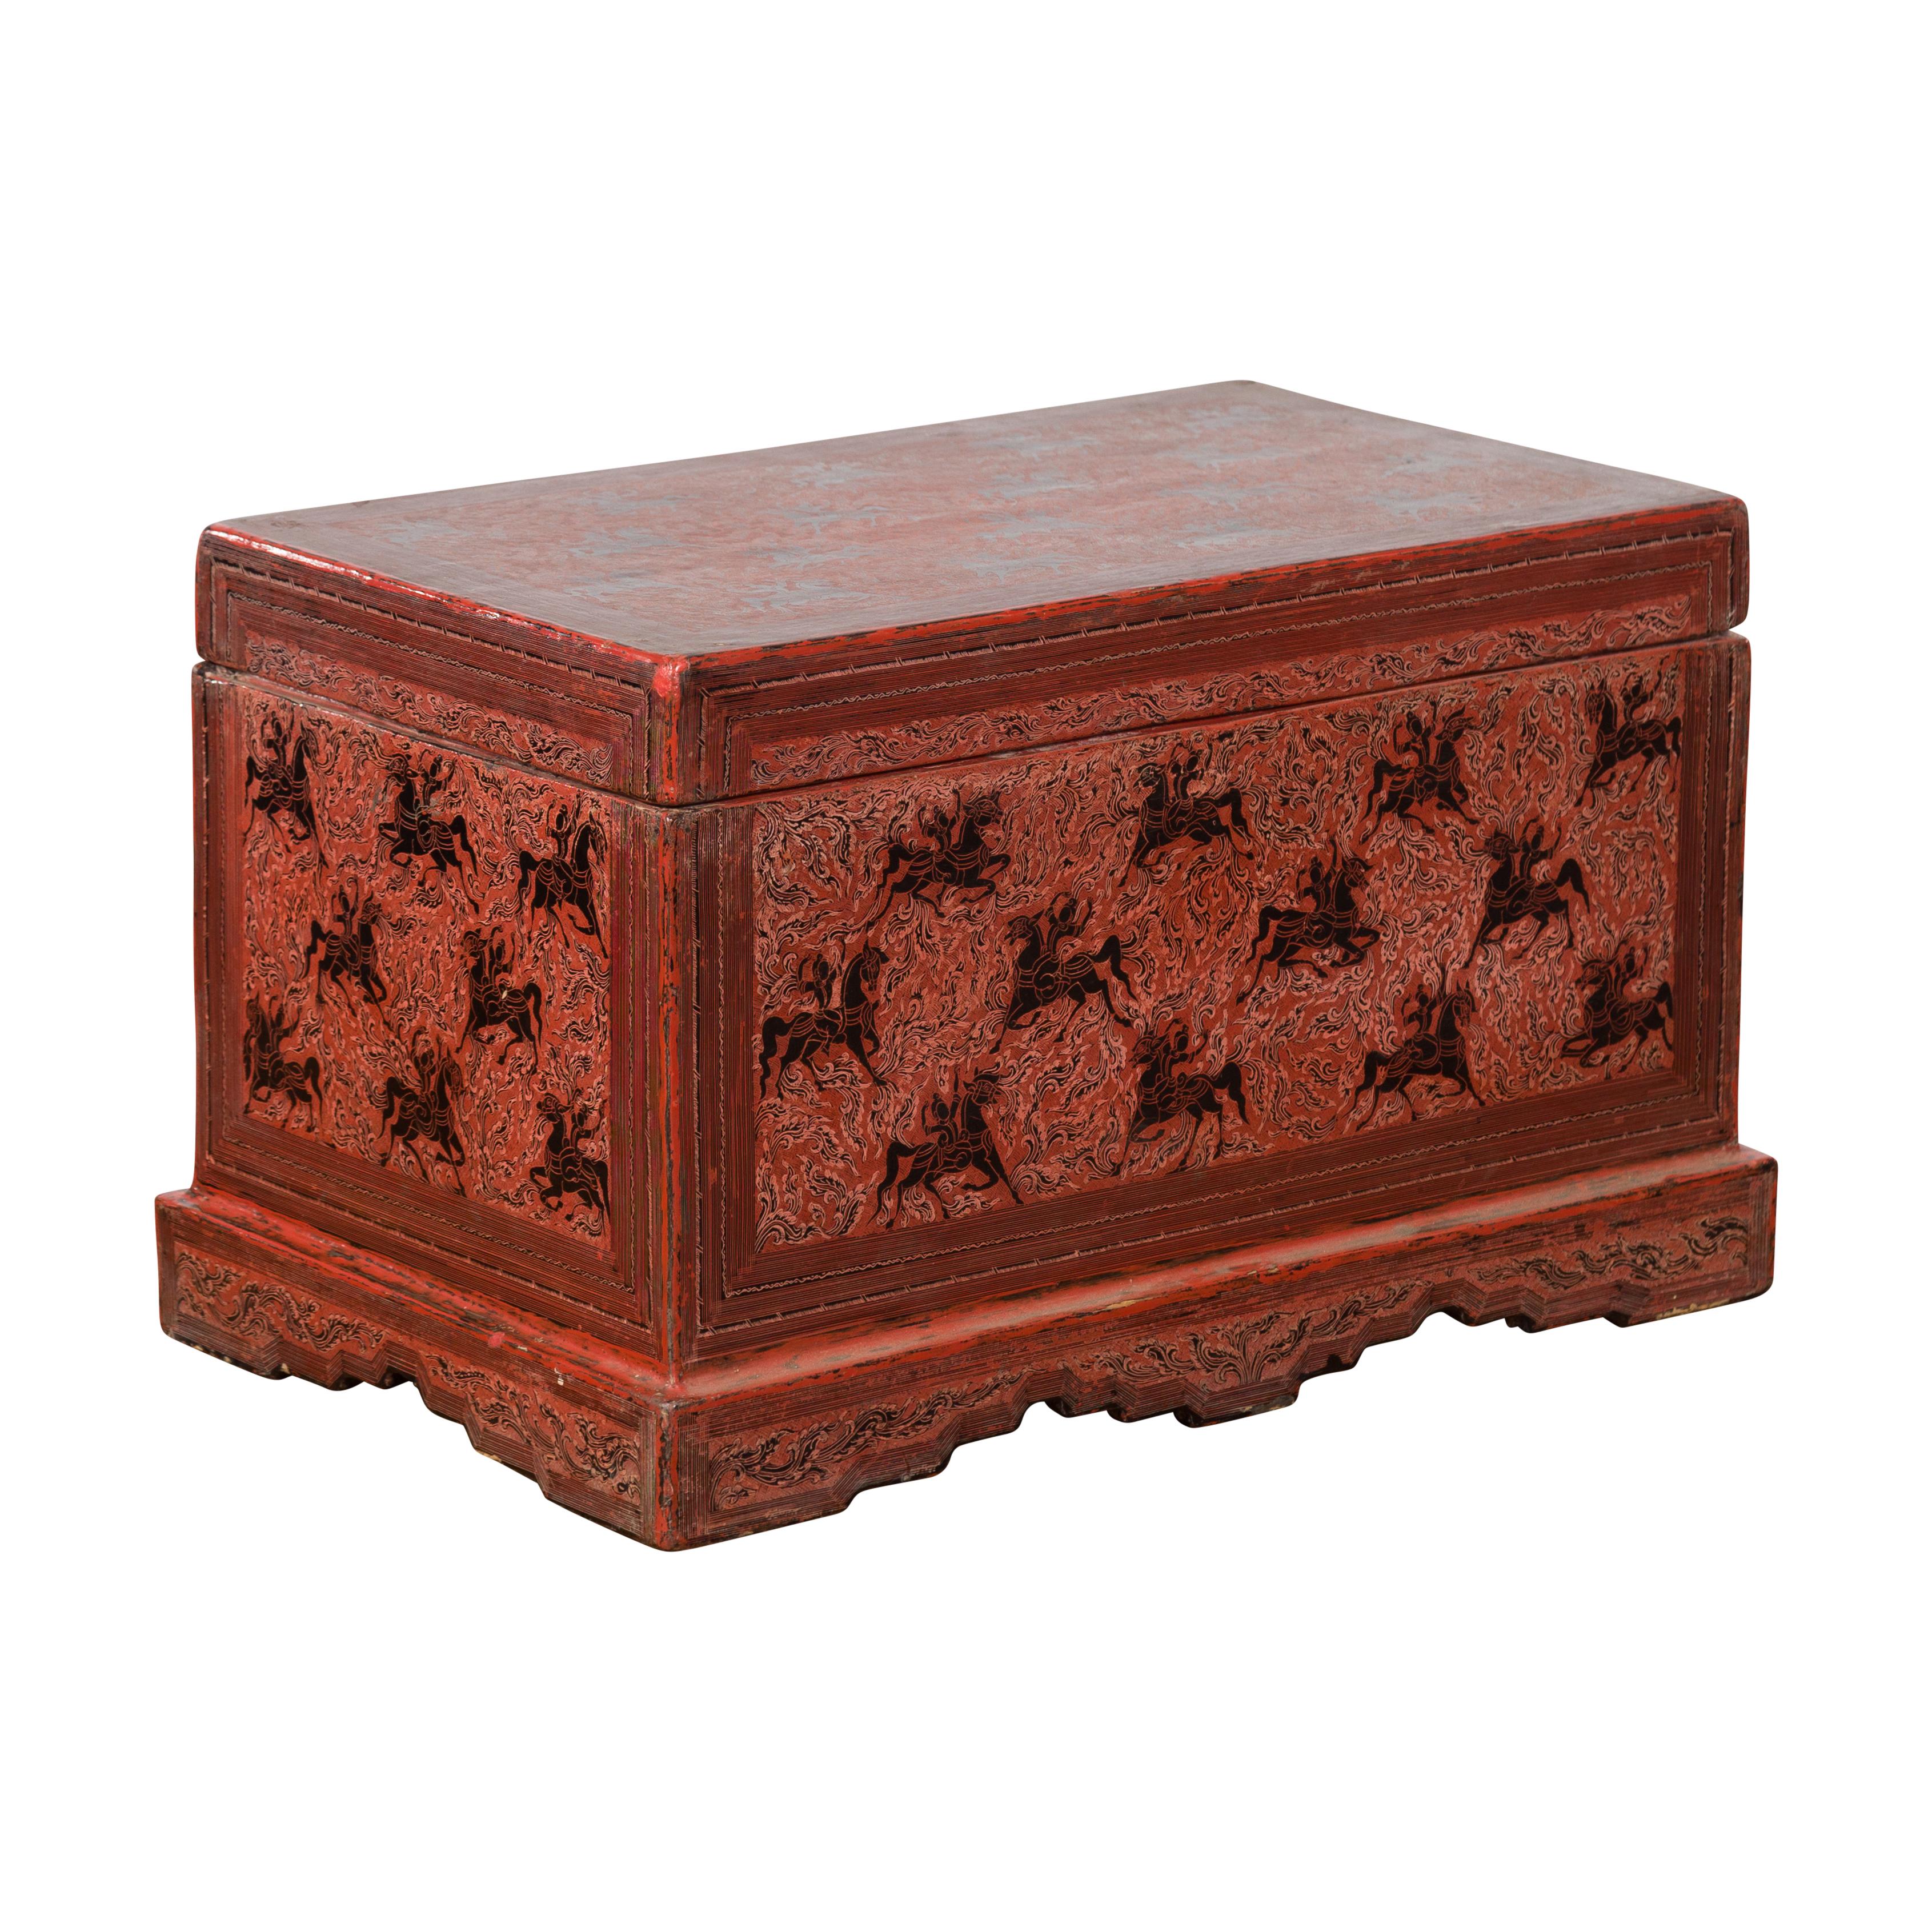 An Indonesian Palembang trunk from the late 19th, early 20th century, with hand-painted décor. Created in Indonesia during the Turn of the Century, this Palembang trunk attracts our attention with its red ground beautifully adorned with a perfectly